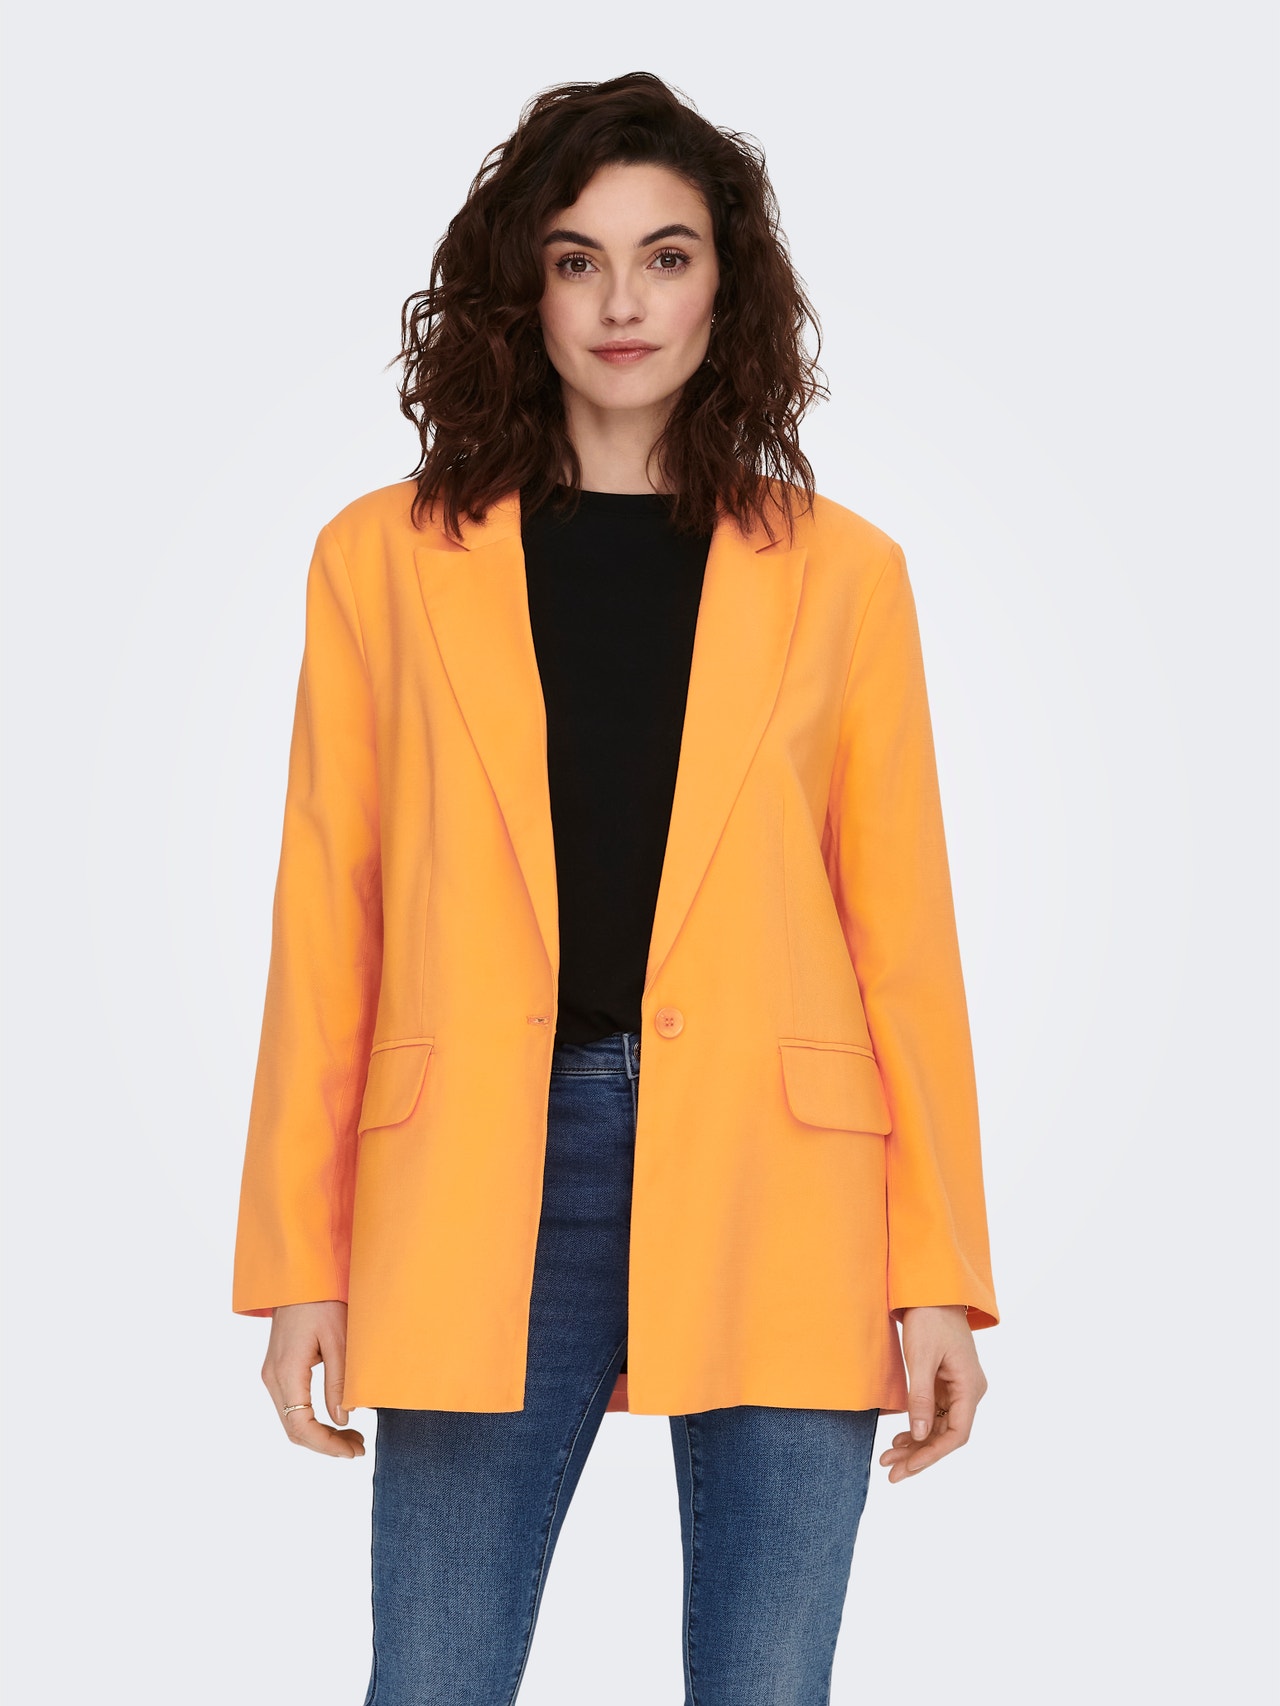 ONLY Loose Fit Blazer -Apricot - 15283602